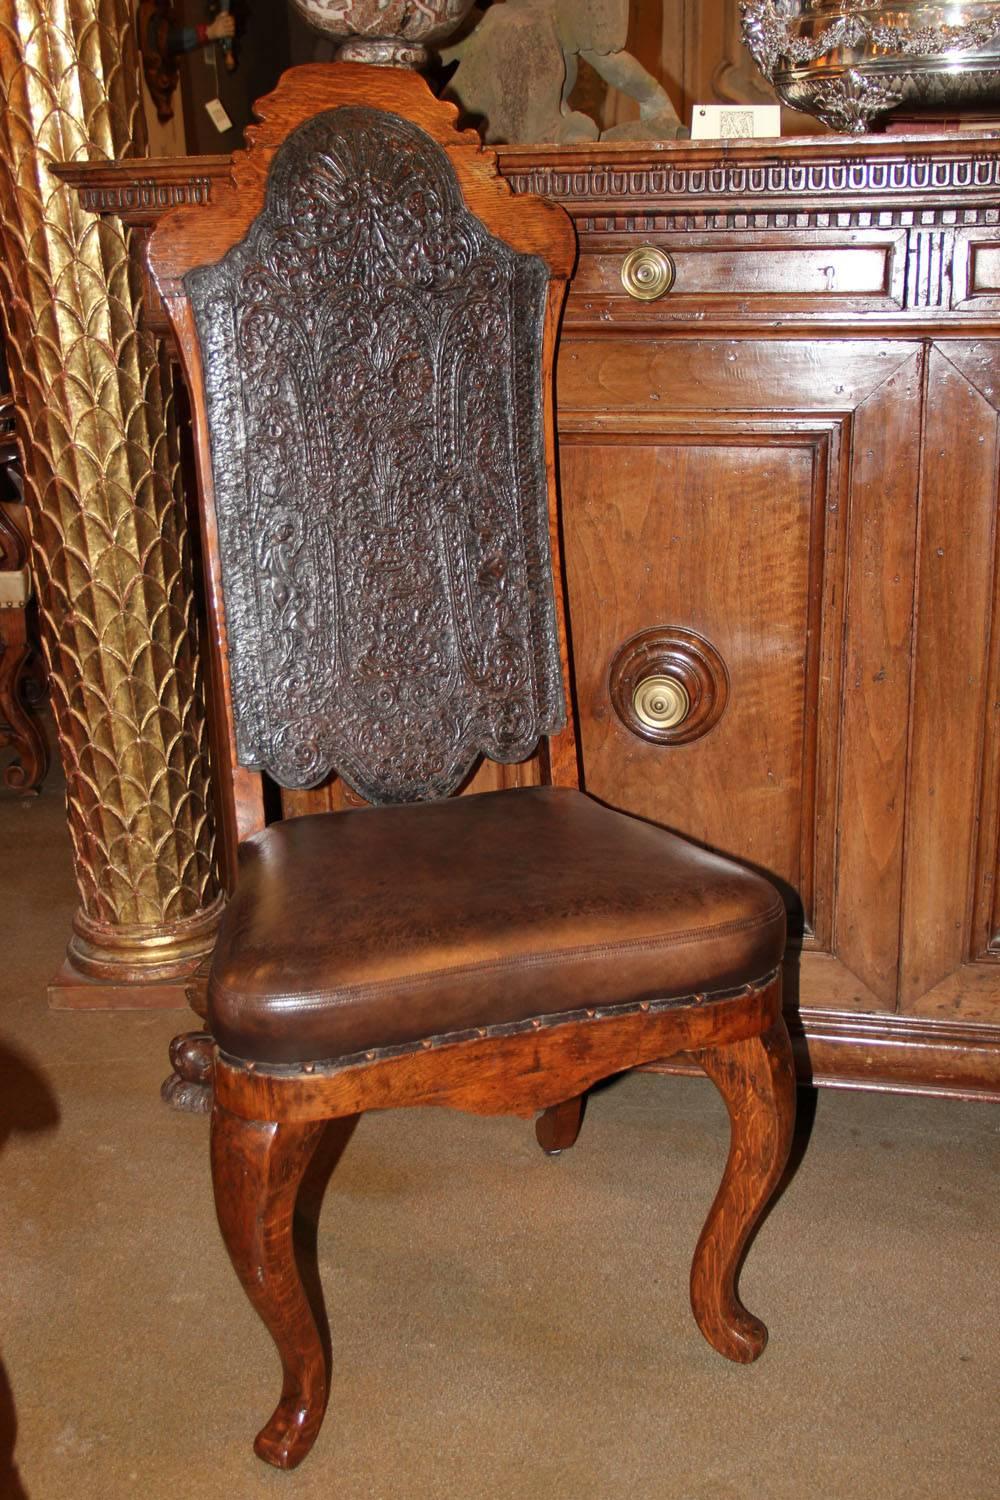 An 18th century Portuguese oak chair, the original leather-embossed inset back depicting flowers in an urn surrounded by foliate and floral motifs, the later antiqued leather seat accented with nailhead trimming, the whole raised on two cabriole